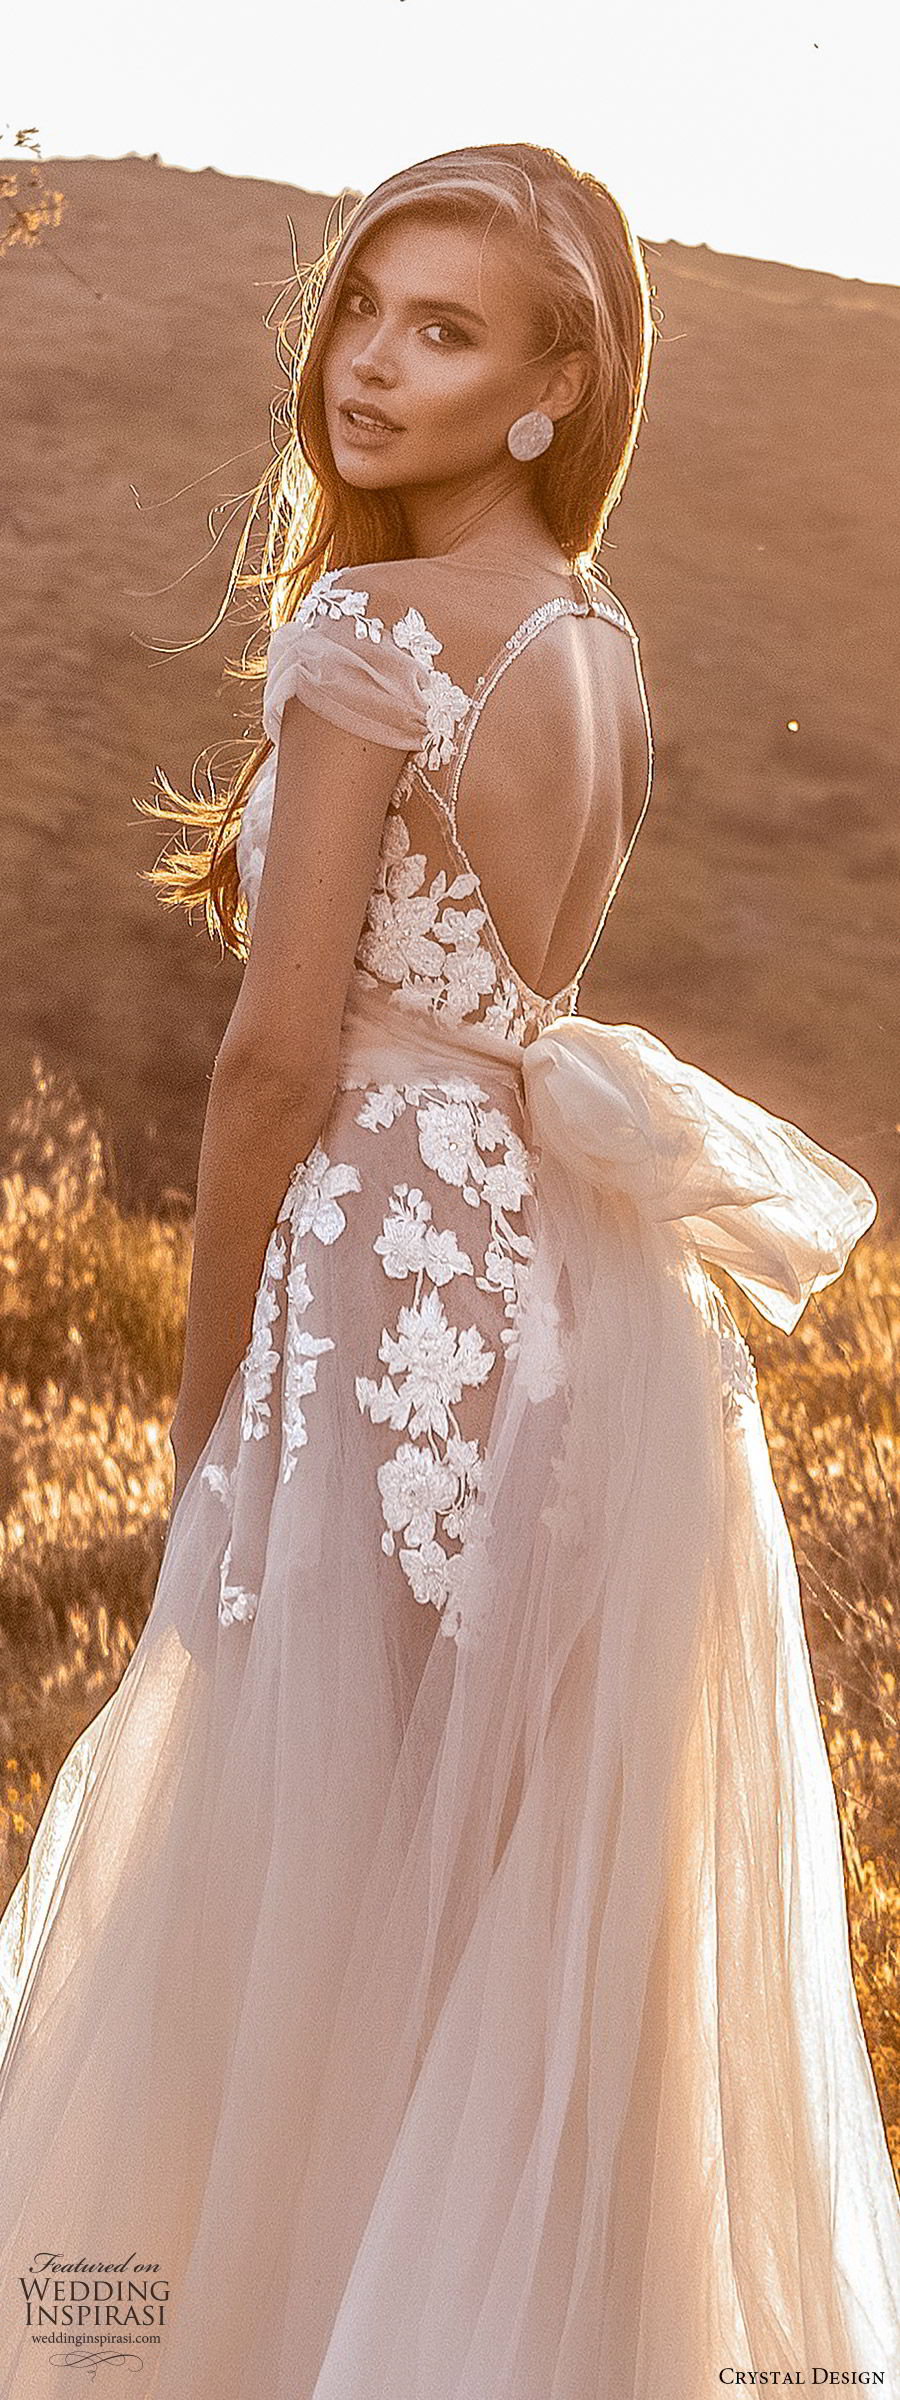 Crystal Design Couture 2020 Wedding Dresses — “Catching